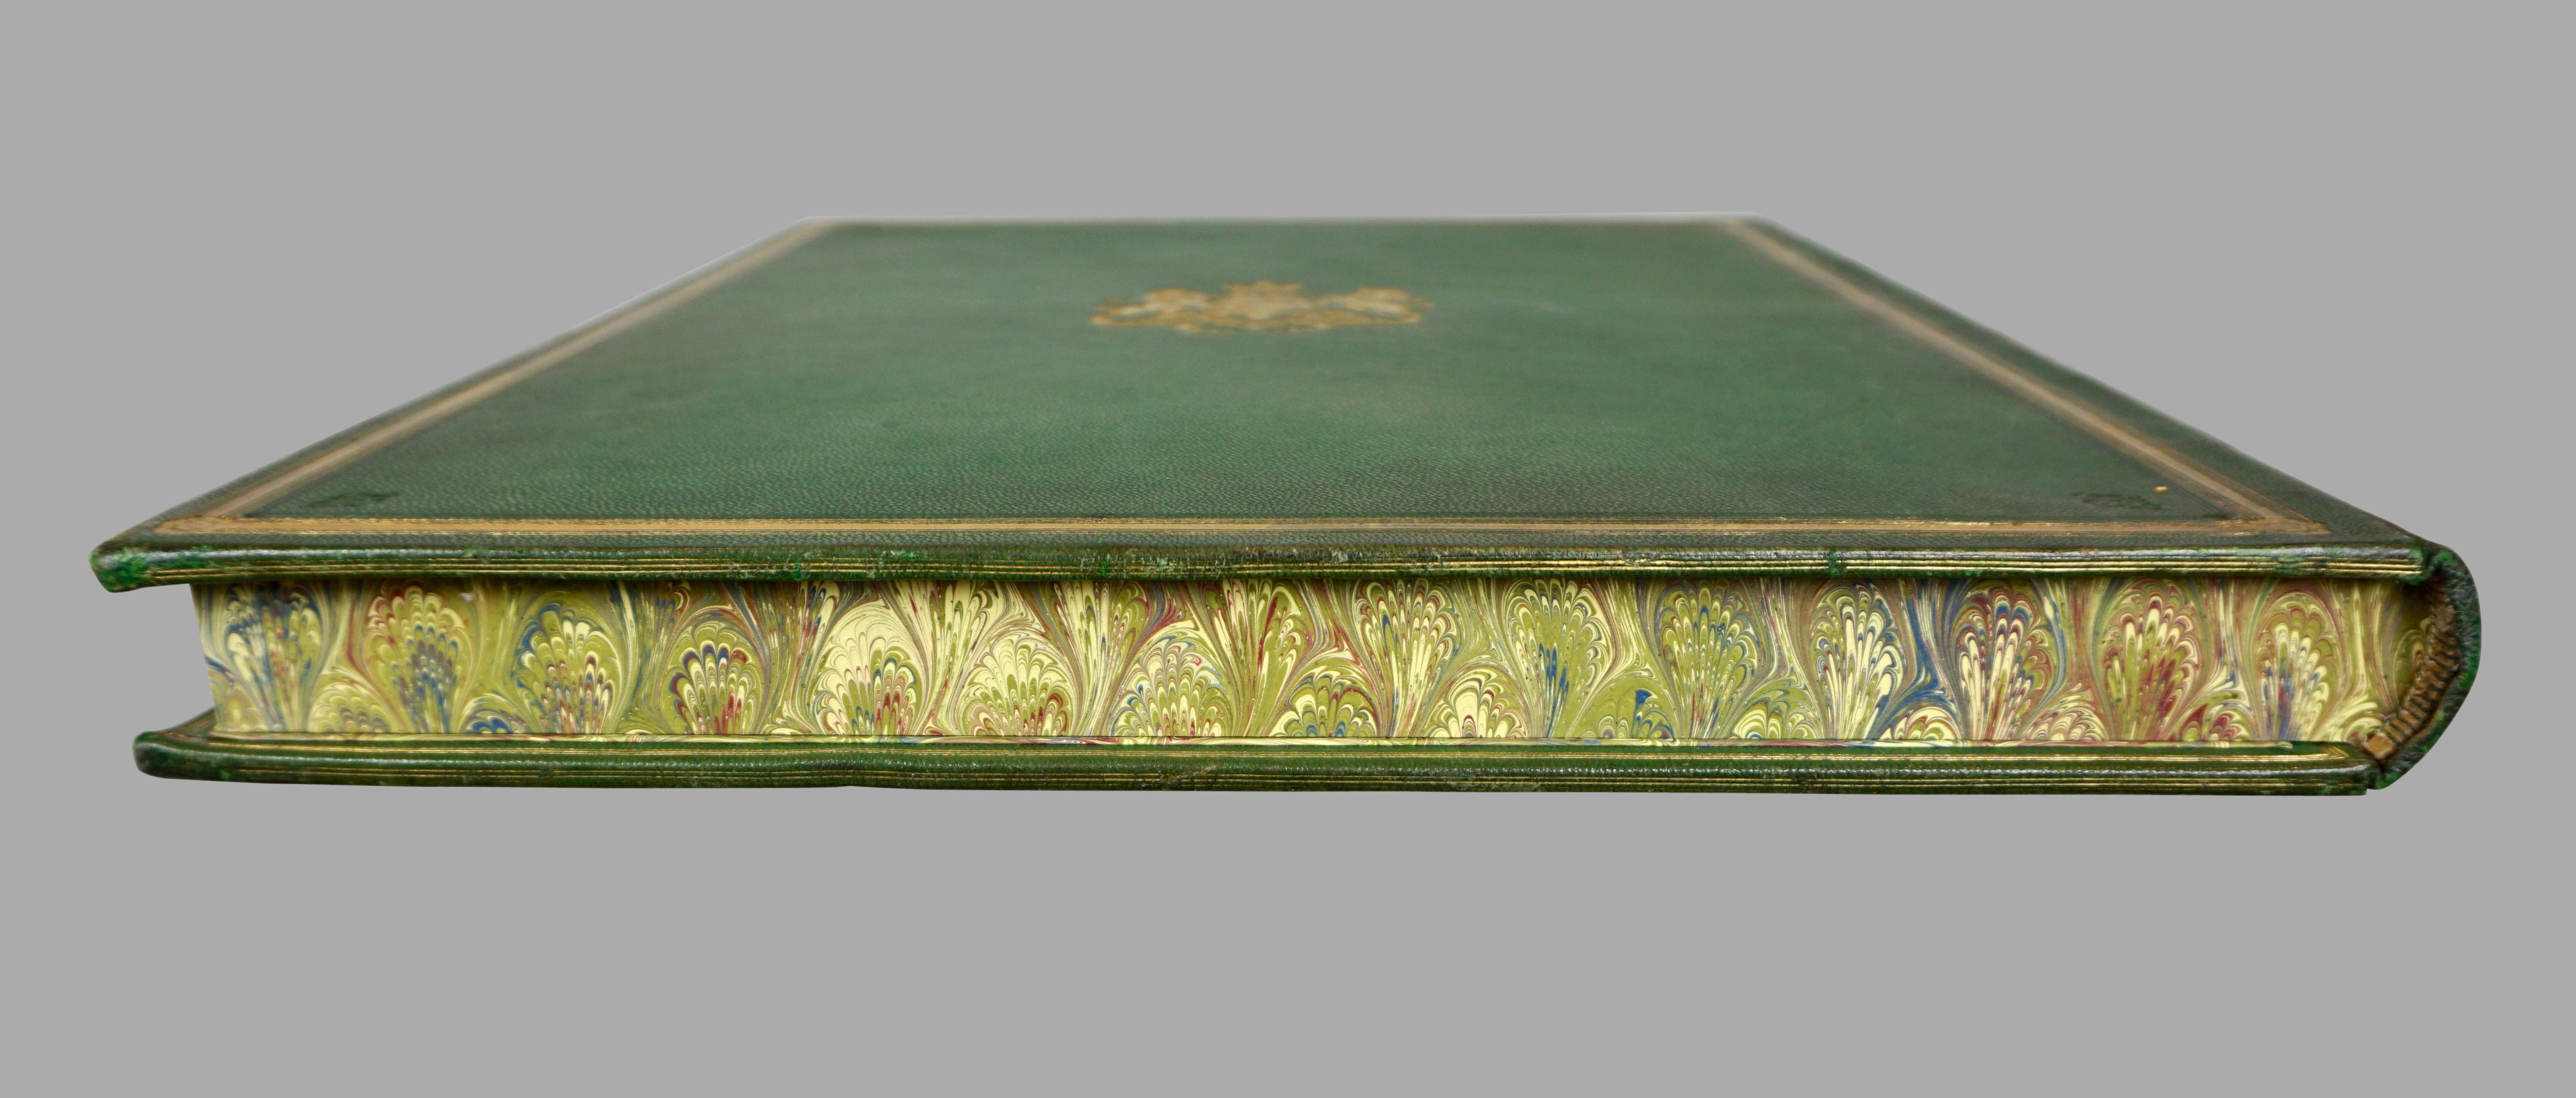 Green Morocco Leather Elephant Folio Book Cover Now A Marbleized Paper Lined Box 3